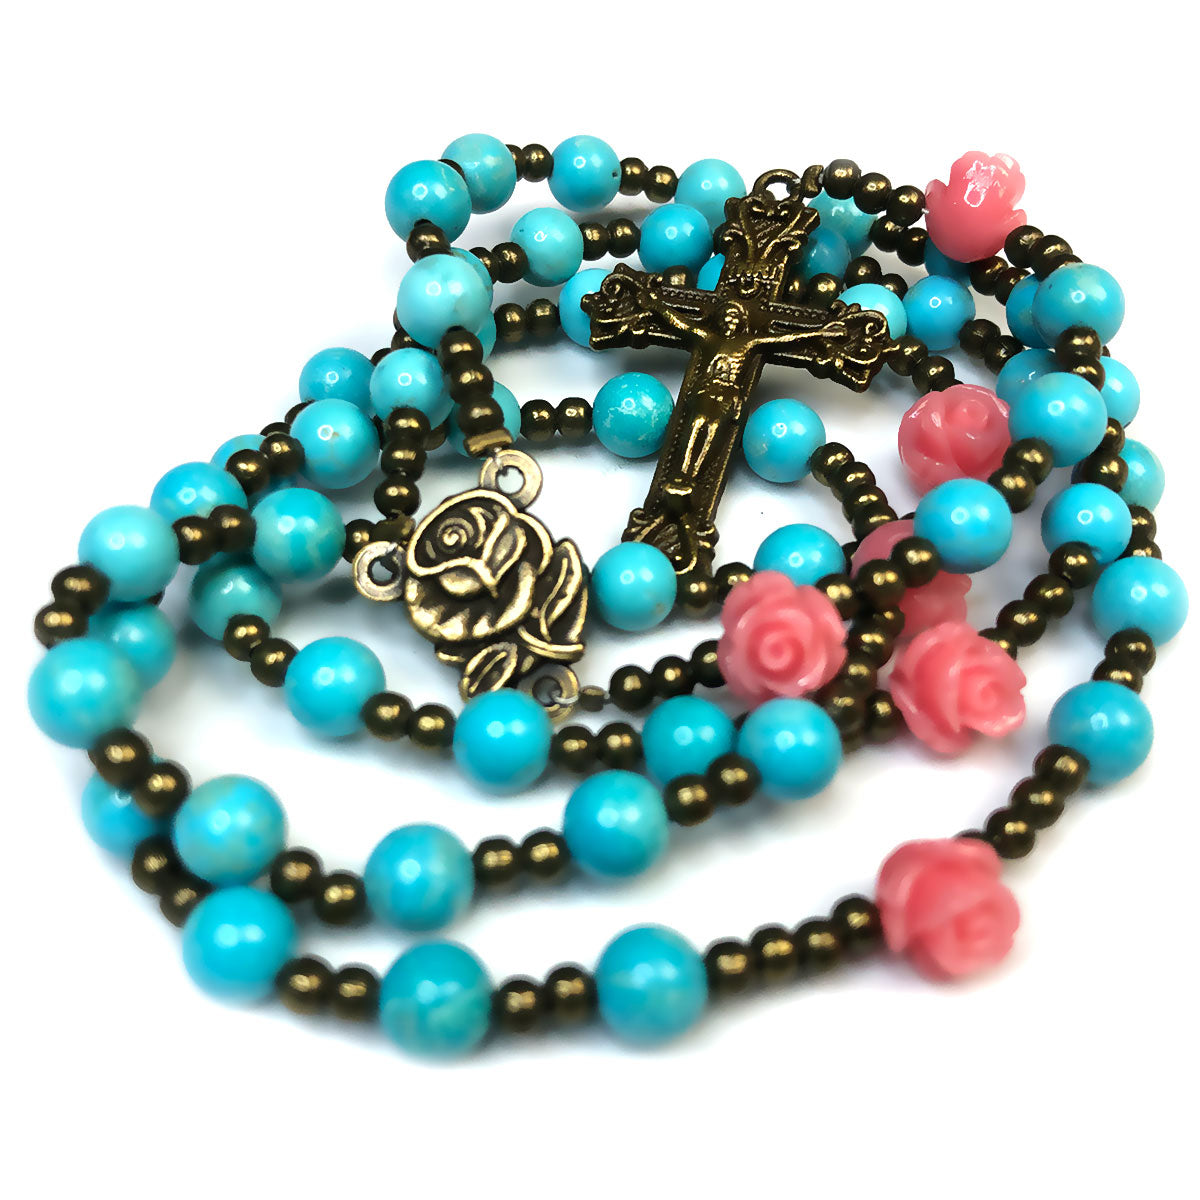 Catholic Heirlooms Our Lady Of Lourdes Turquoise Stone Pink Rose Rosary